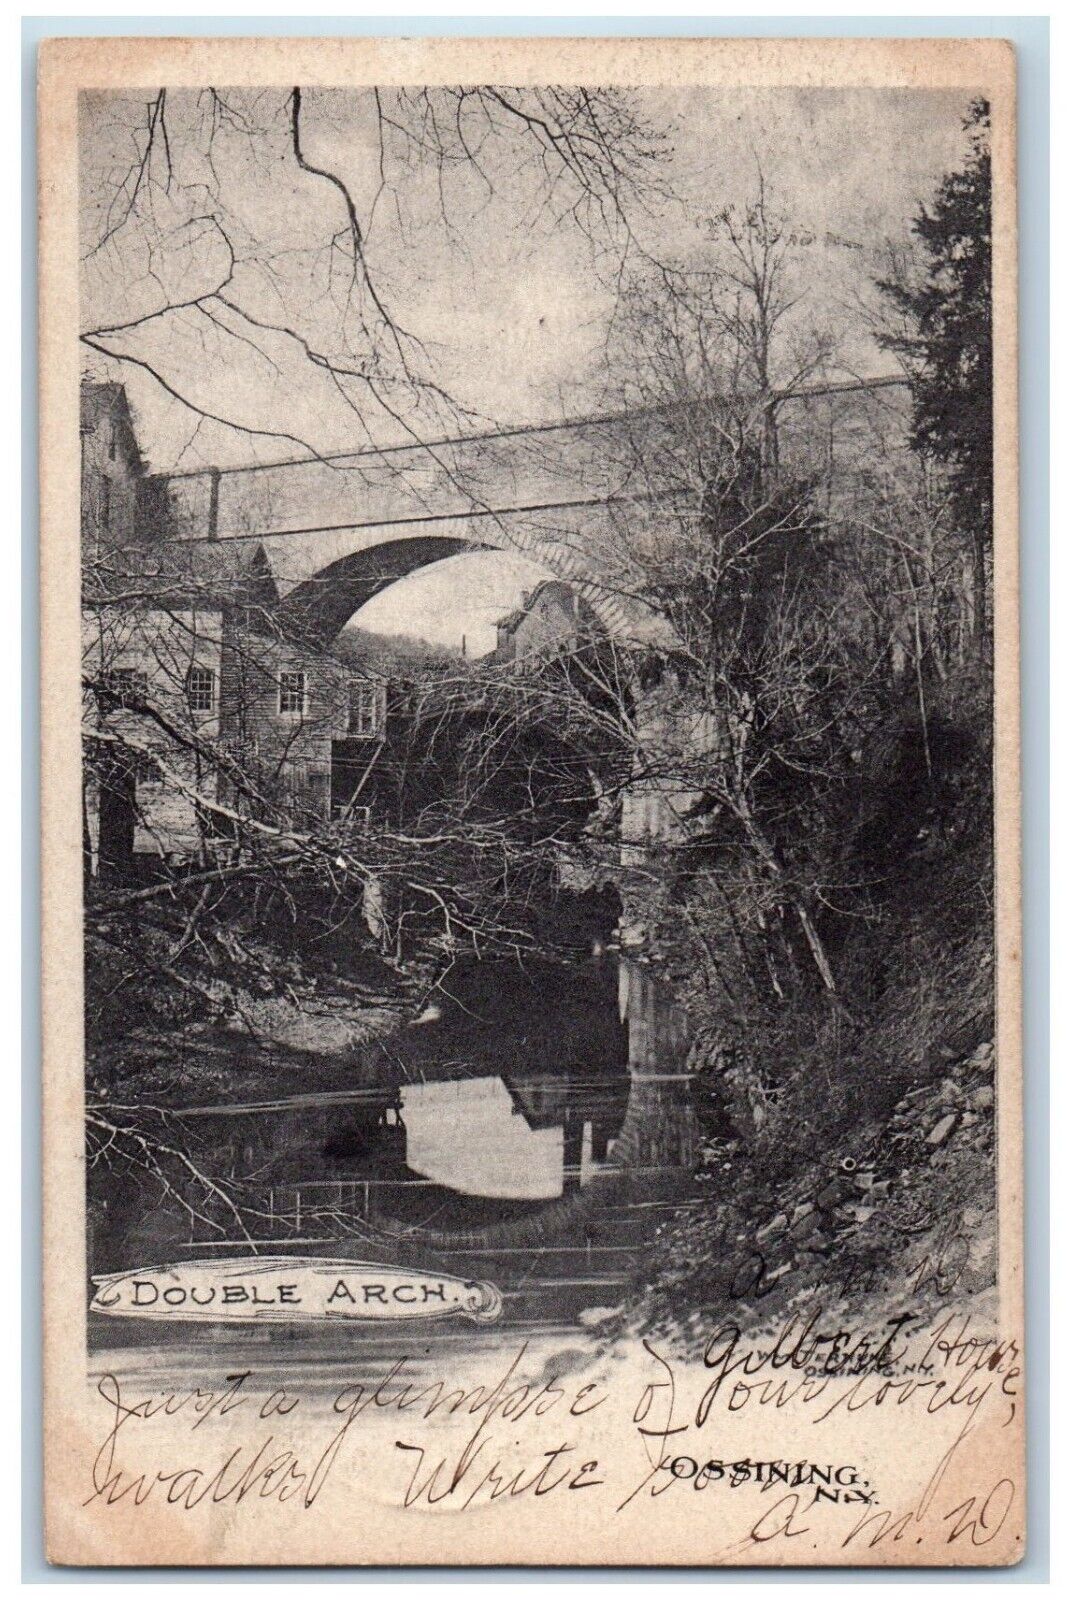 1904 Double Arch River Scenic View Ossining New York NY Antique Vintage Postcard